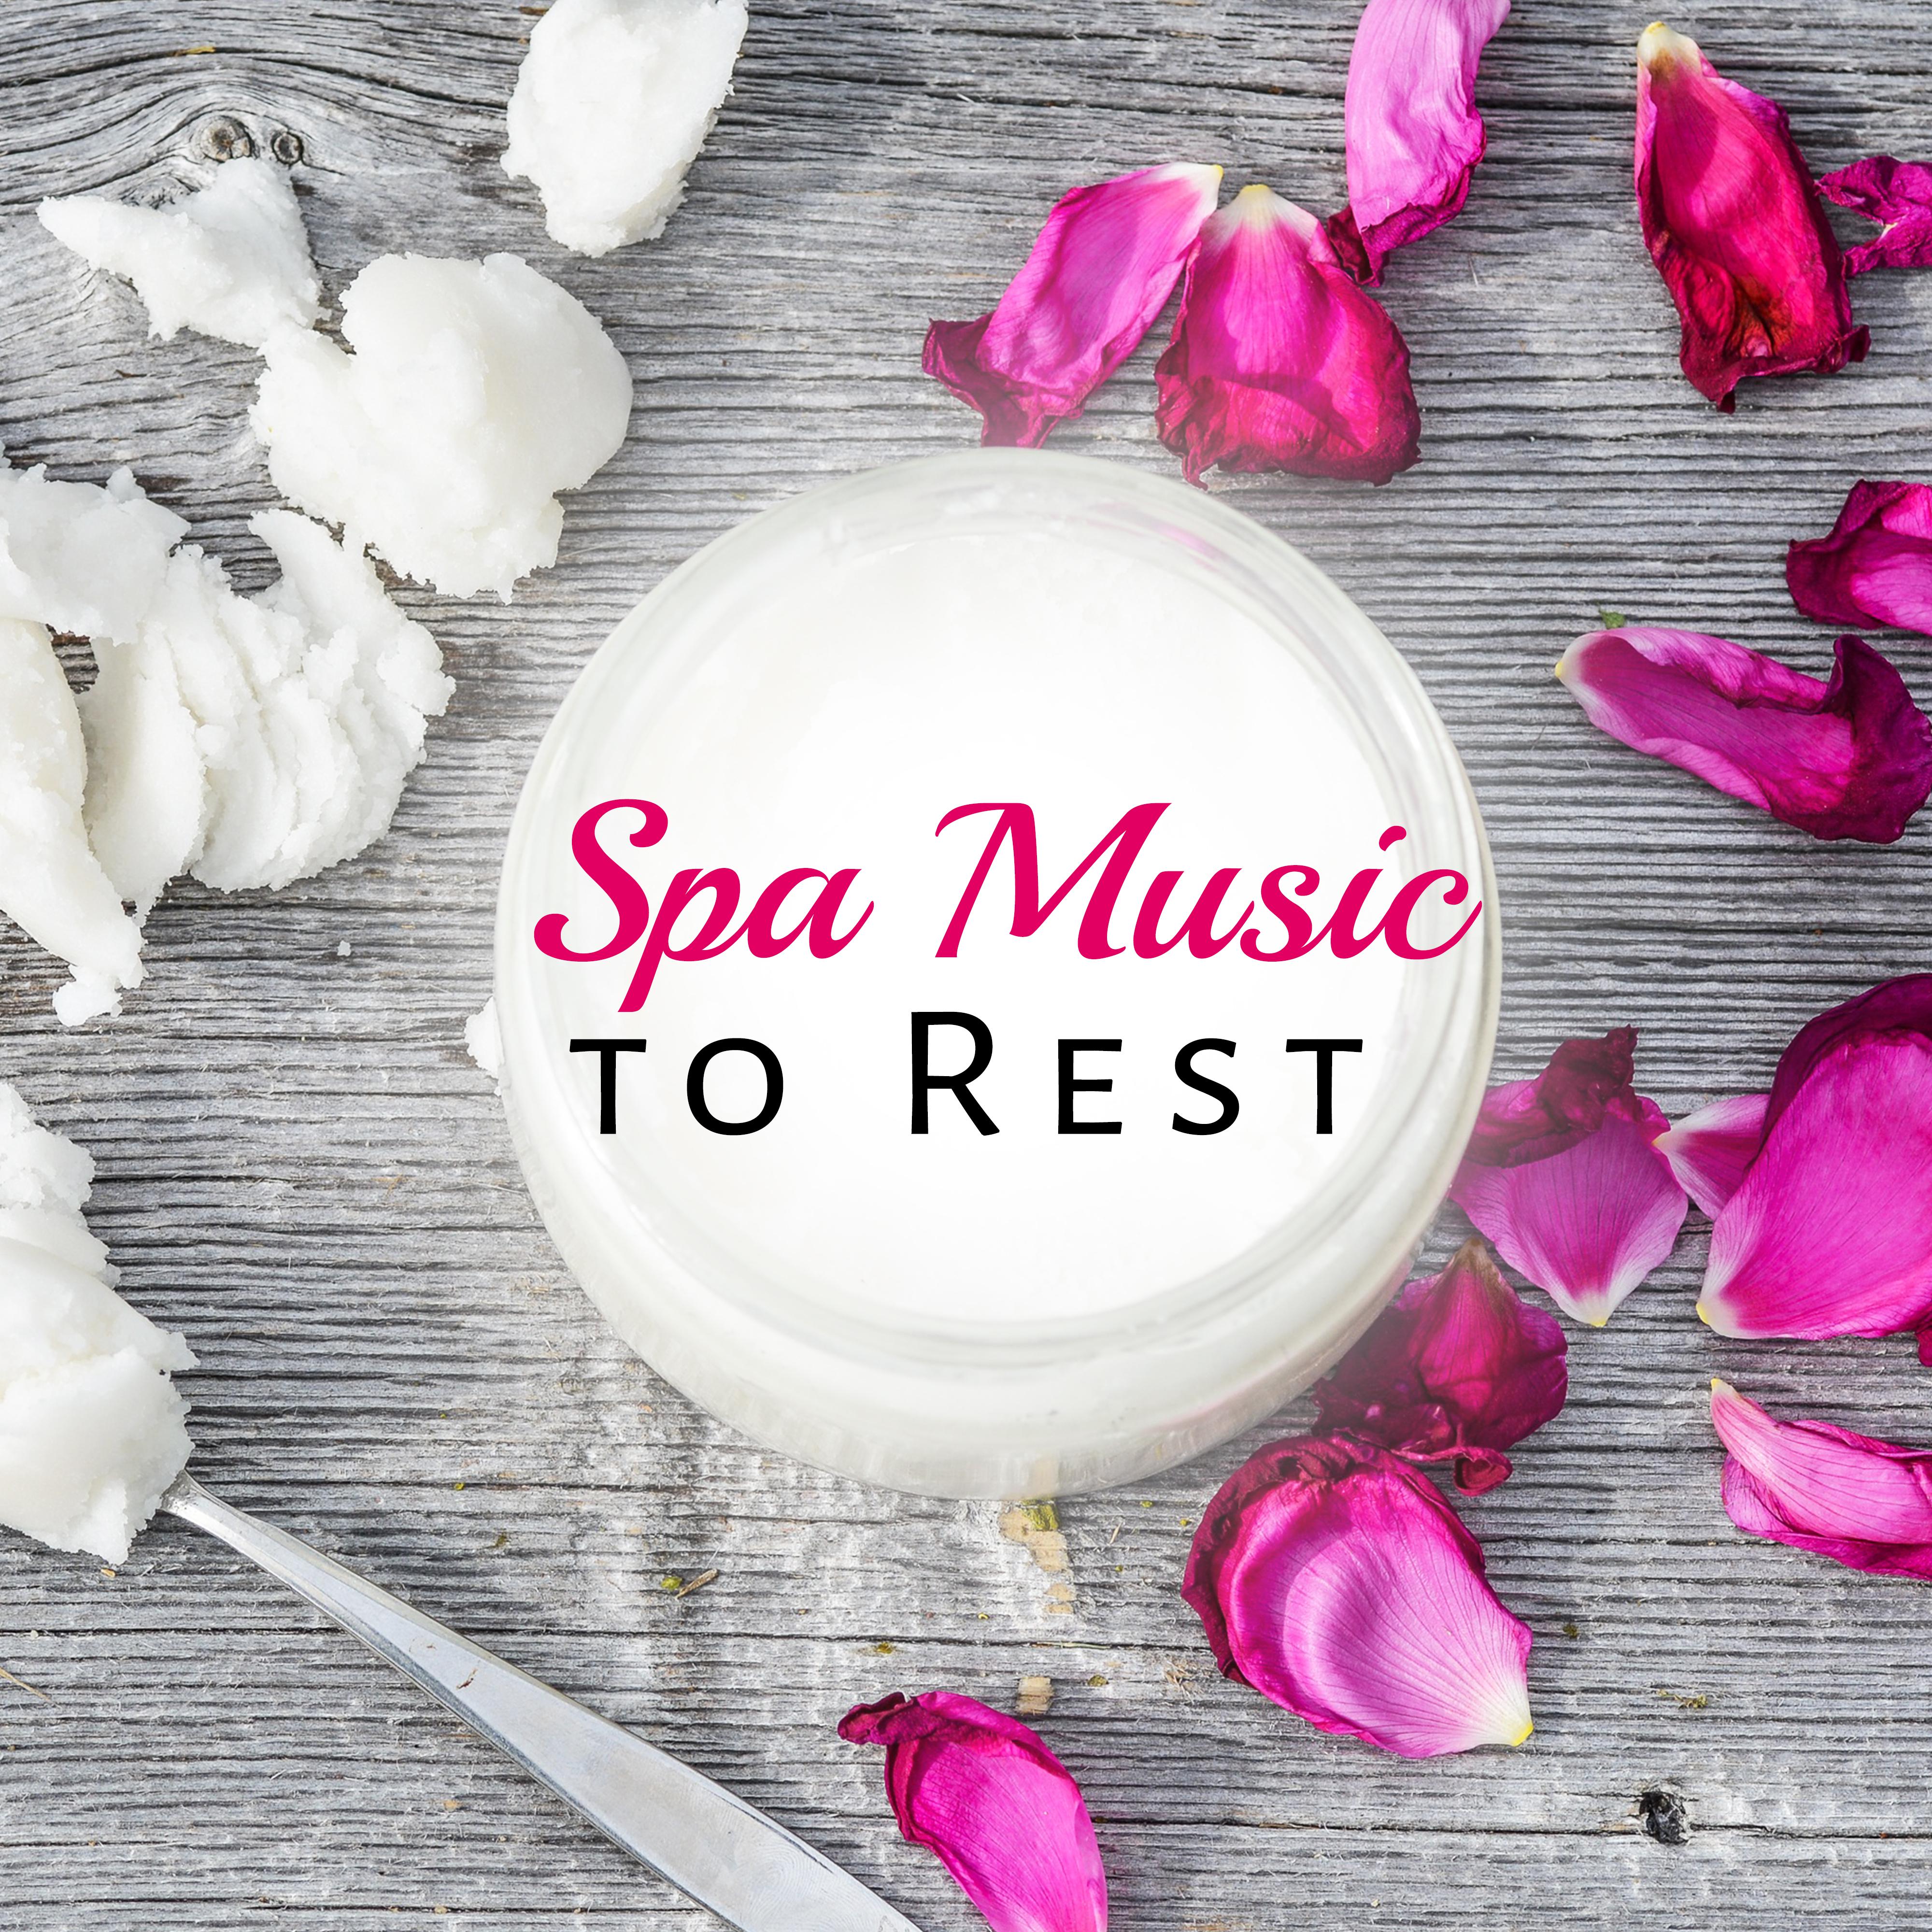 Spa Music to Rest  Healing Therapy, Soft New Age Music, Peaceful Sounds, Rest  Relax